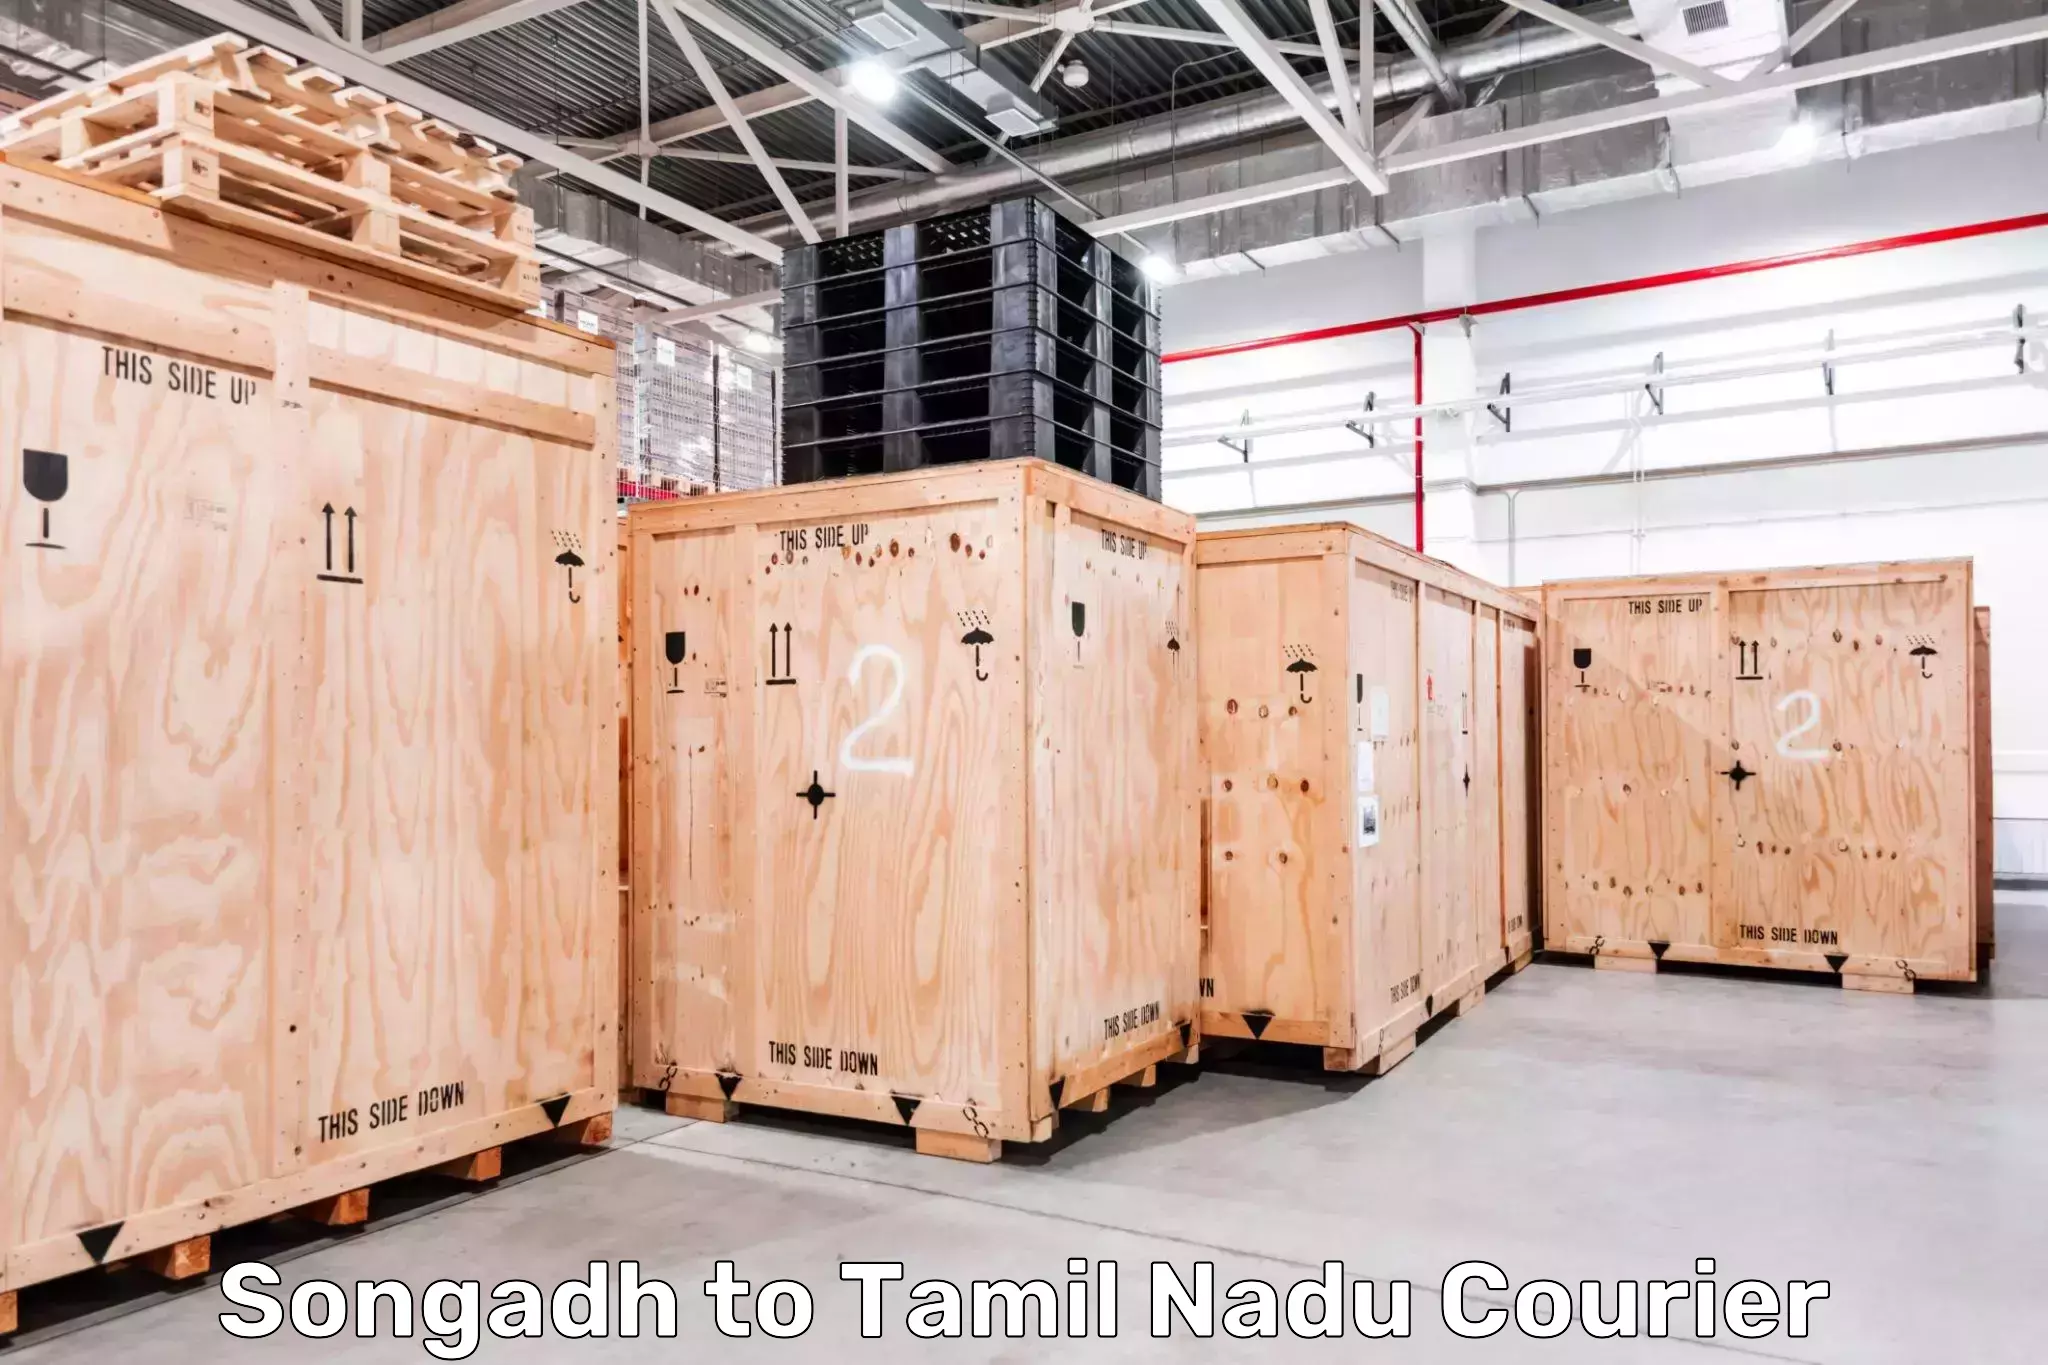 Courier app Songadh to Tamil Nadu